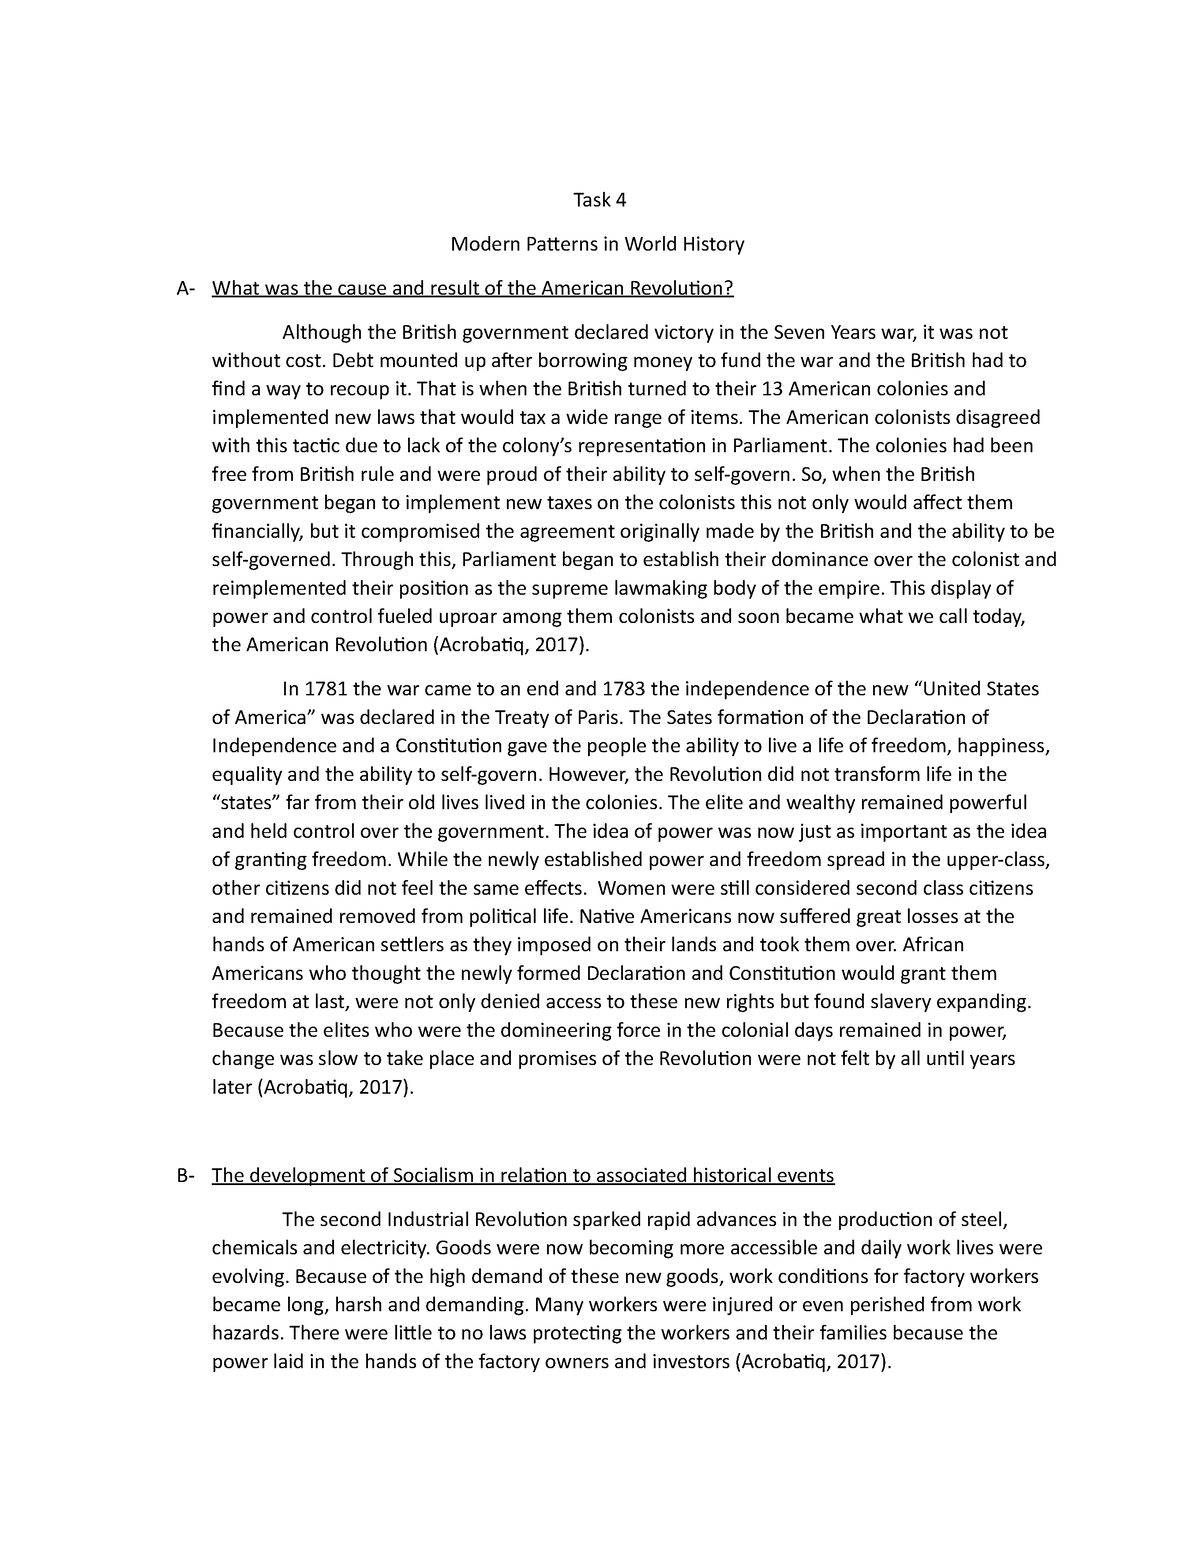 World History- Task 4 - Task 4 Modern Patterns in World History A- What ...